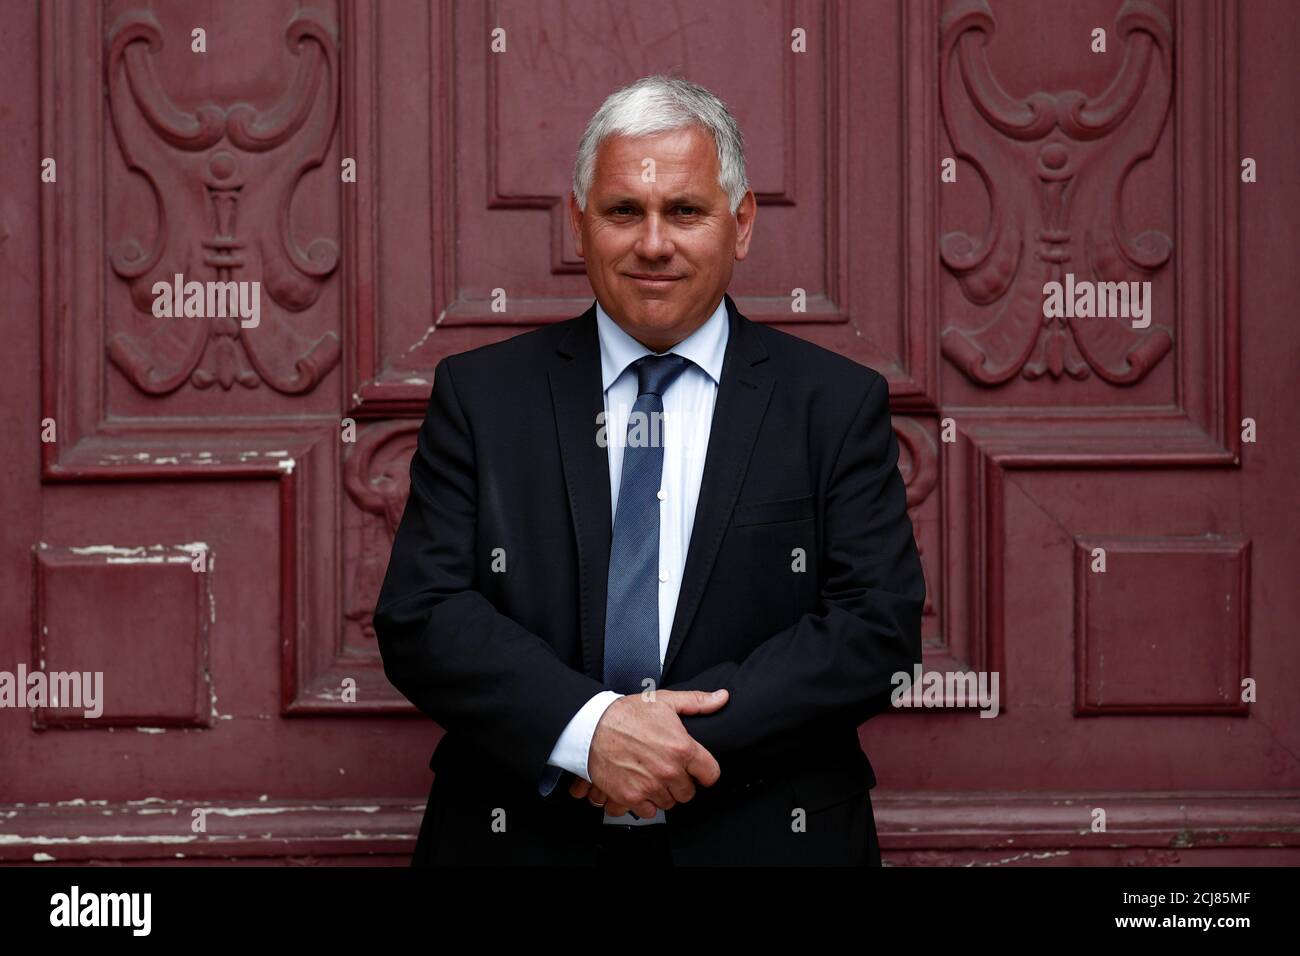 Jean-Claude Bellanger, general secretary of Les Compagnons du Devoir poses  in front of their headquarters in Paris, France, April 24, 2019. Around  10,000 students are trained every year by Les Compagnons du